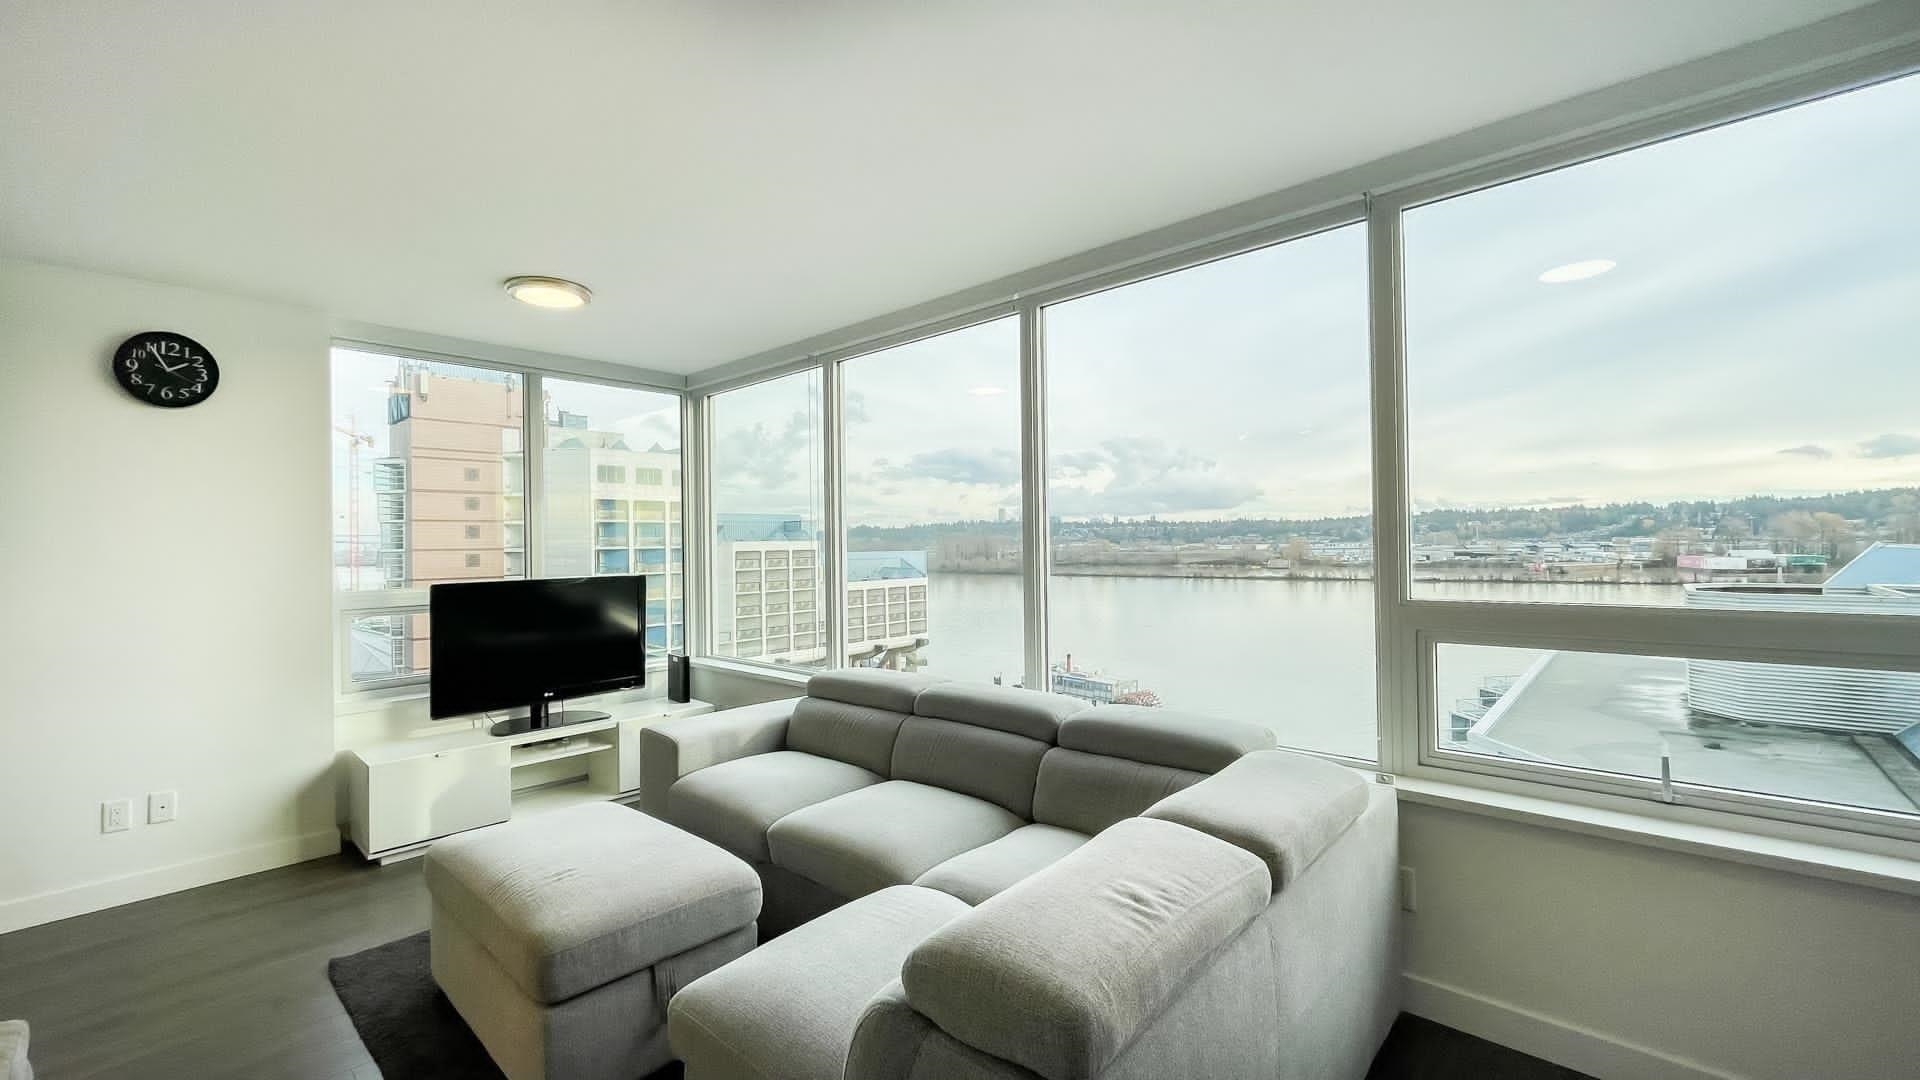 Quay Apartment/Condo for sale:  2 bedroom 936 sq.ft. (Listed 2021-12-14)